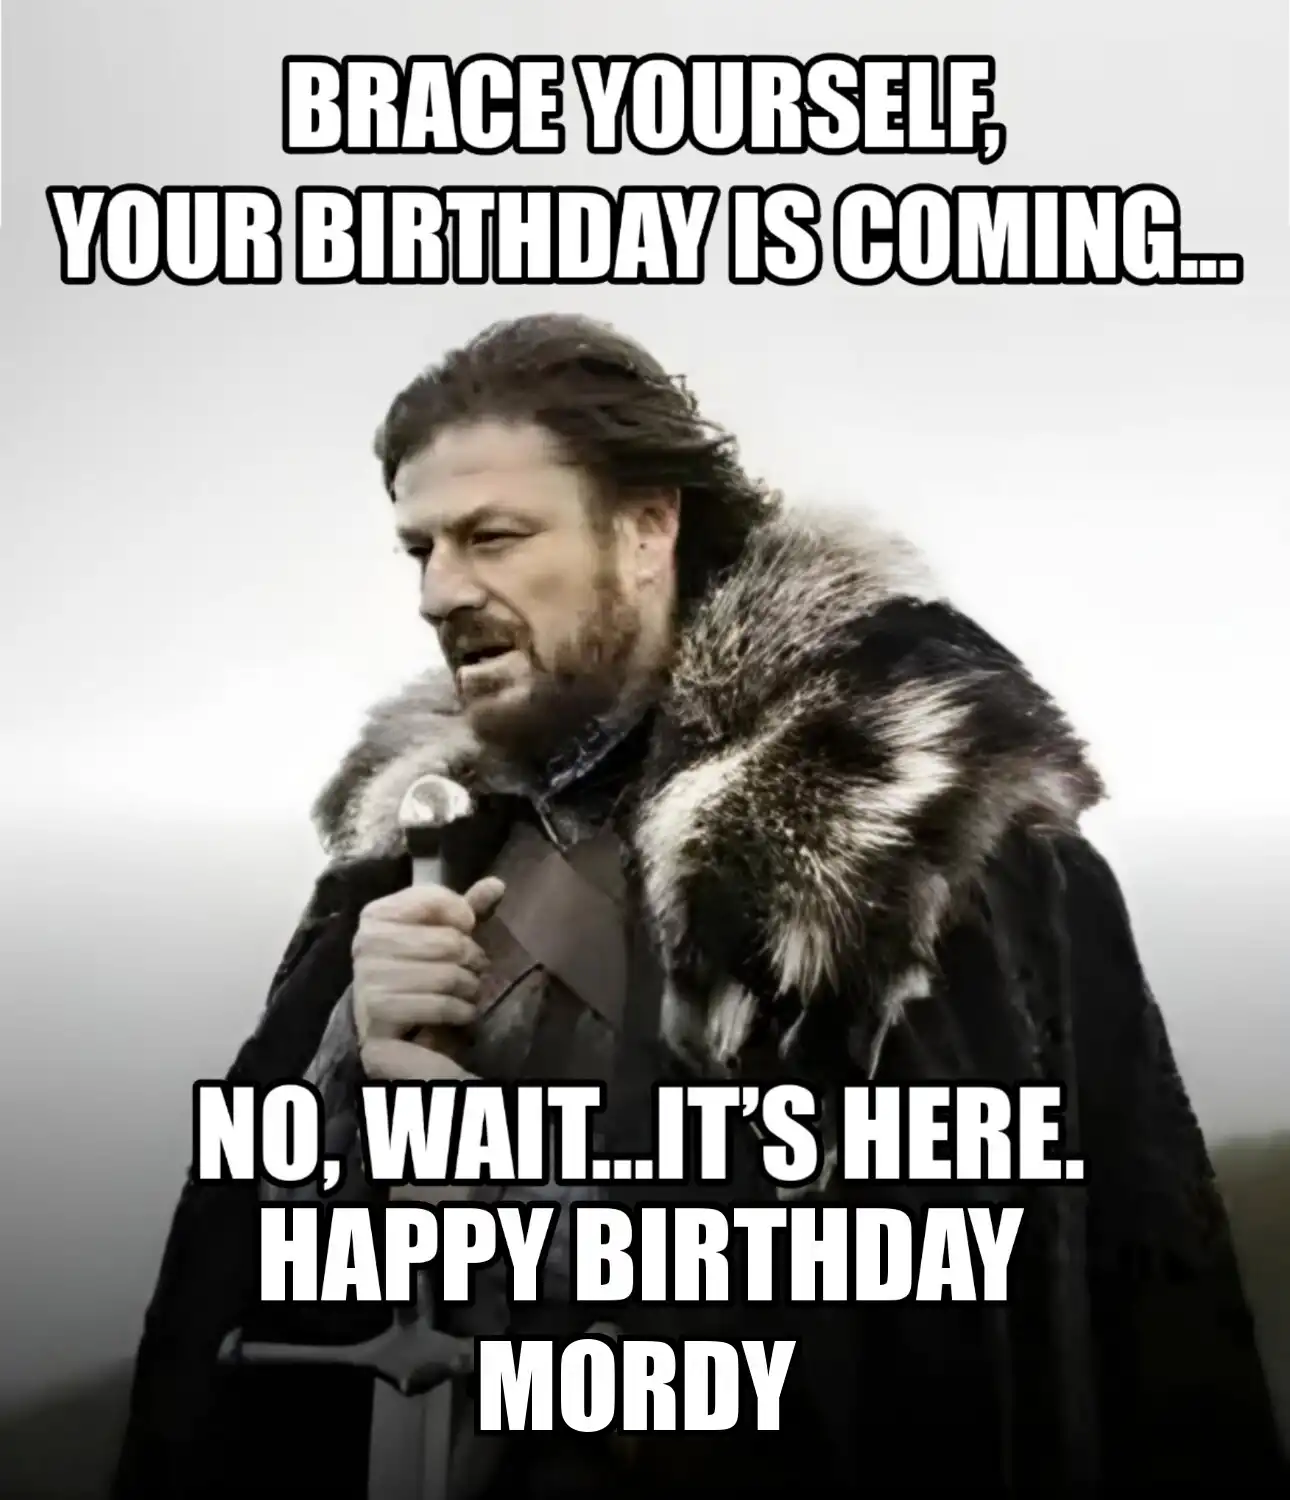 Happy Birthday Mordy Brace Yourself Your Birthday Is Coming Meme